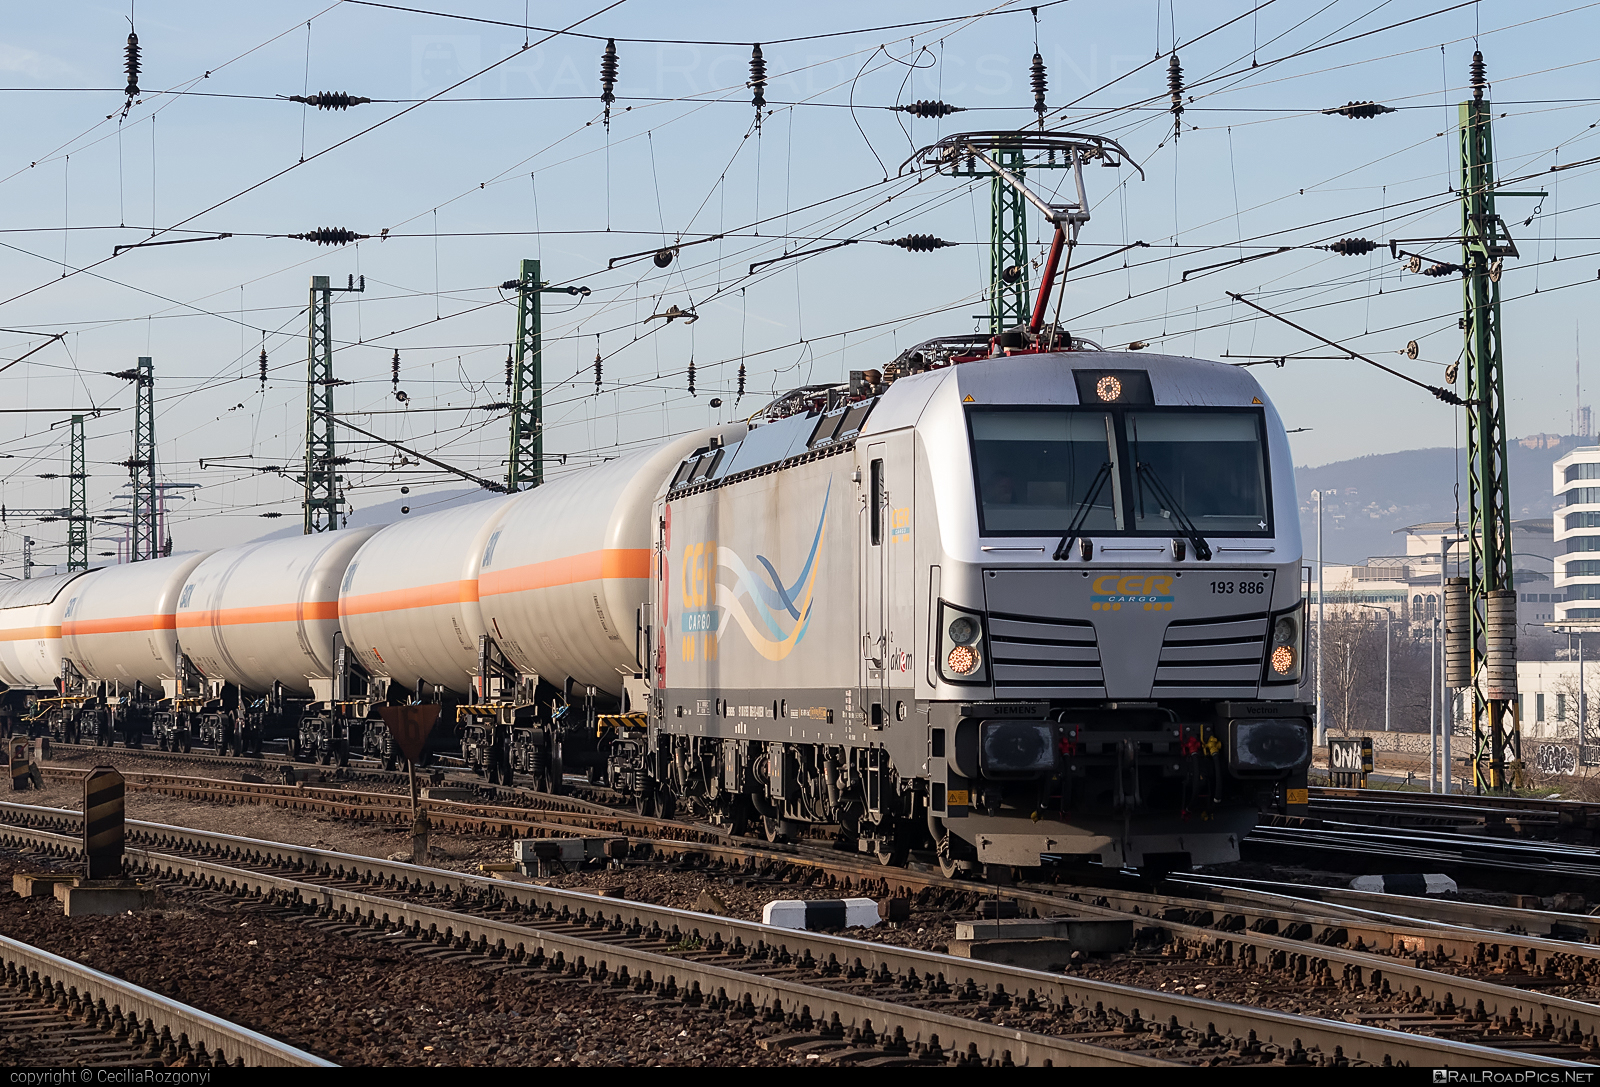 Siemens Vectron MS - 193 886 operated by CER Cargo Holding SE #akiem #akiemsas #cer #cercargoholding #cercargoholdingse #gatx #kesselwagen #siemens #siemensVectron #siemensVectronMS #tankwagon #vectron #vectronMS